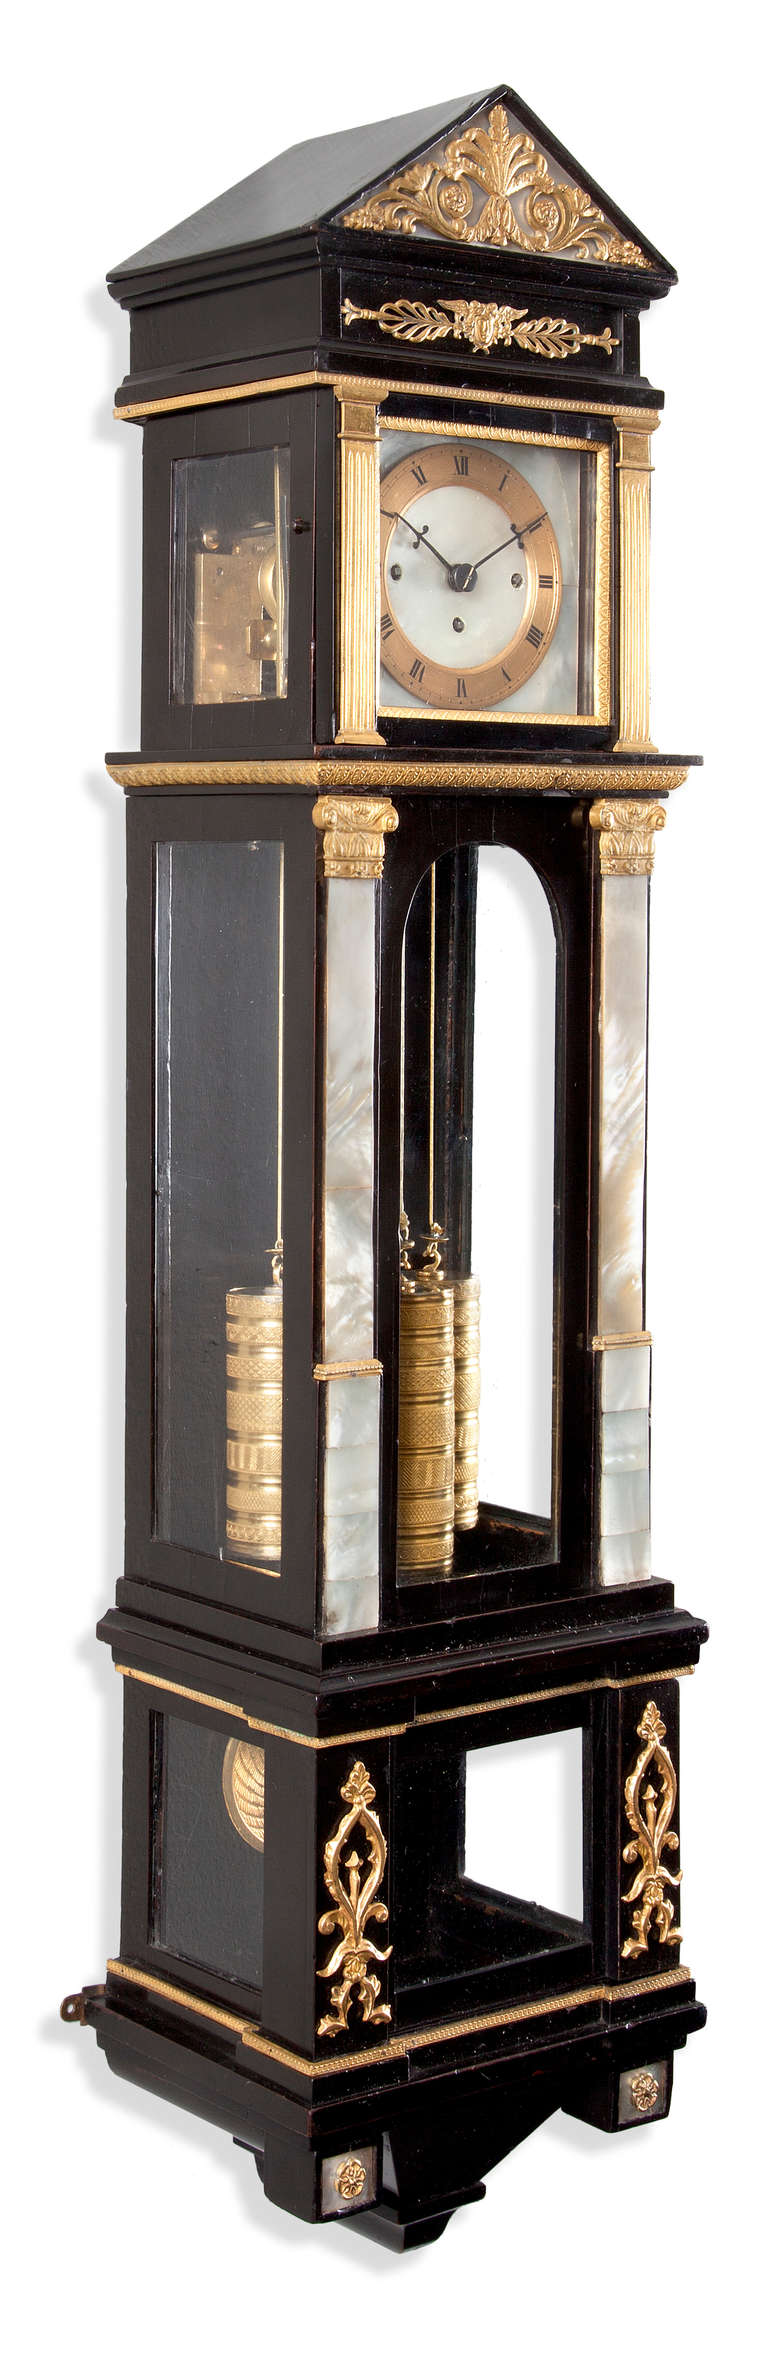 with 'Grand Sonnerie' in an ormolu-mounted, ebonised and mother-of-pearl case.